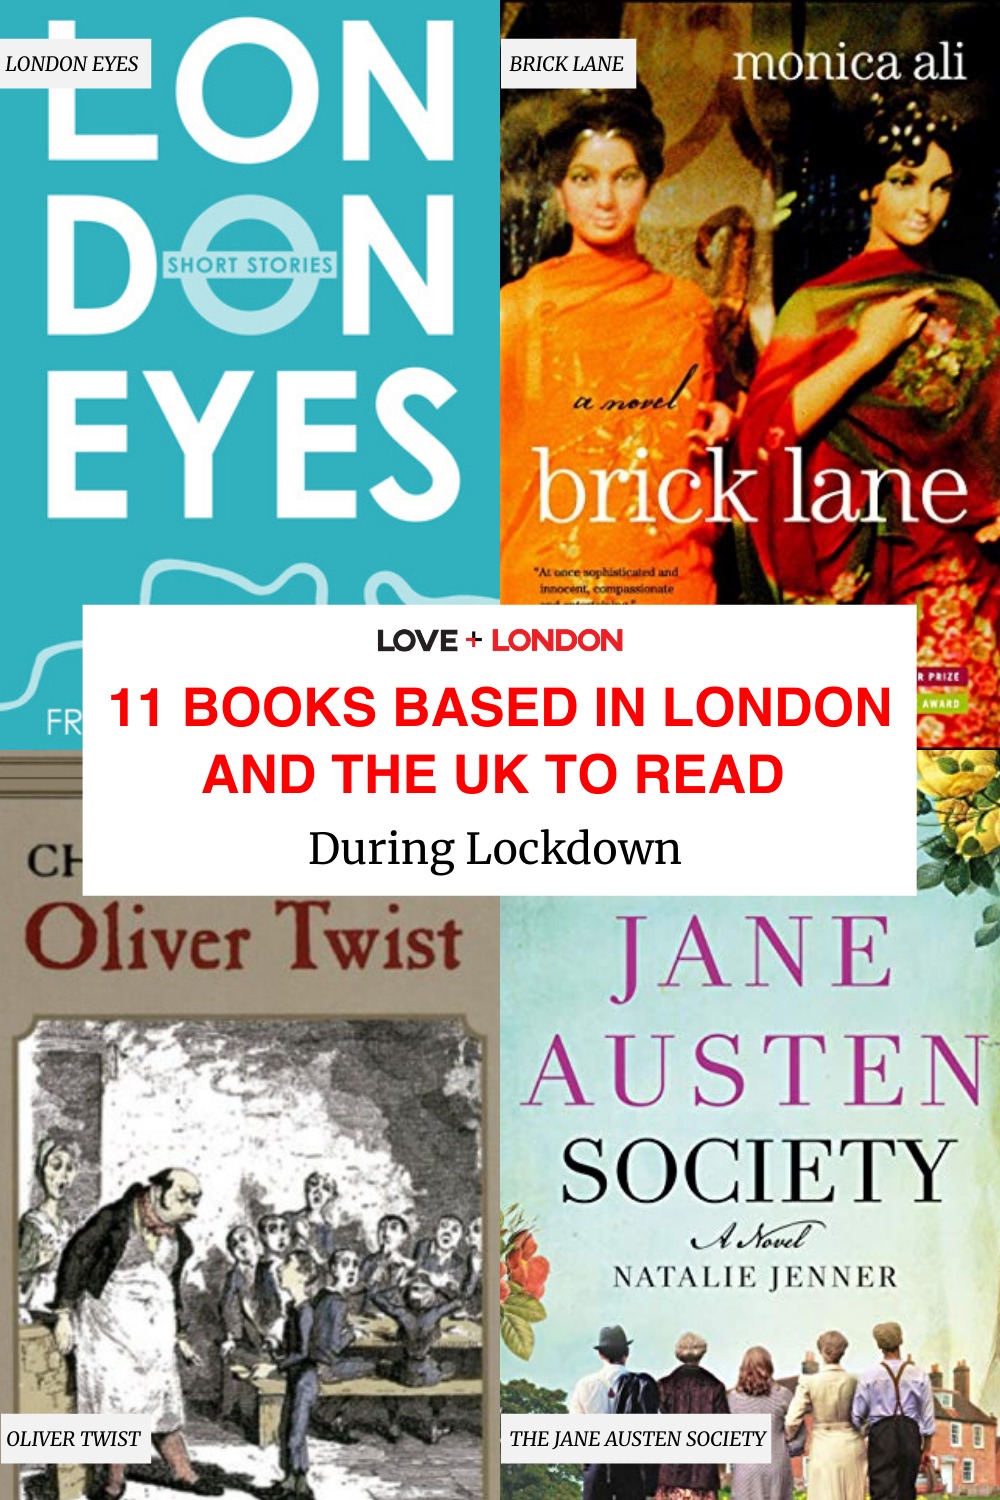 London and UK-based books to read to cure your London blues